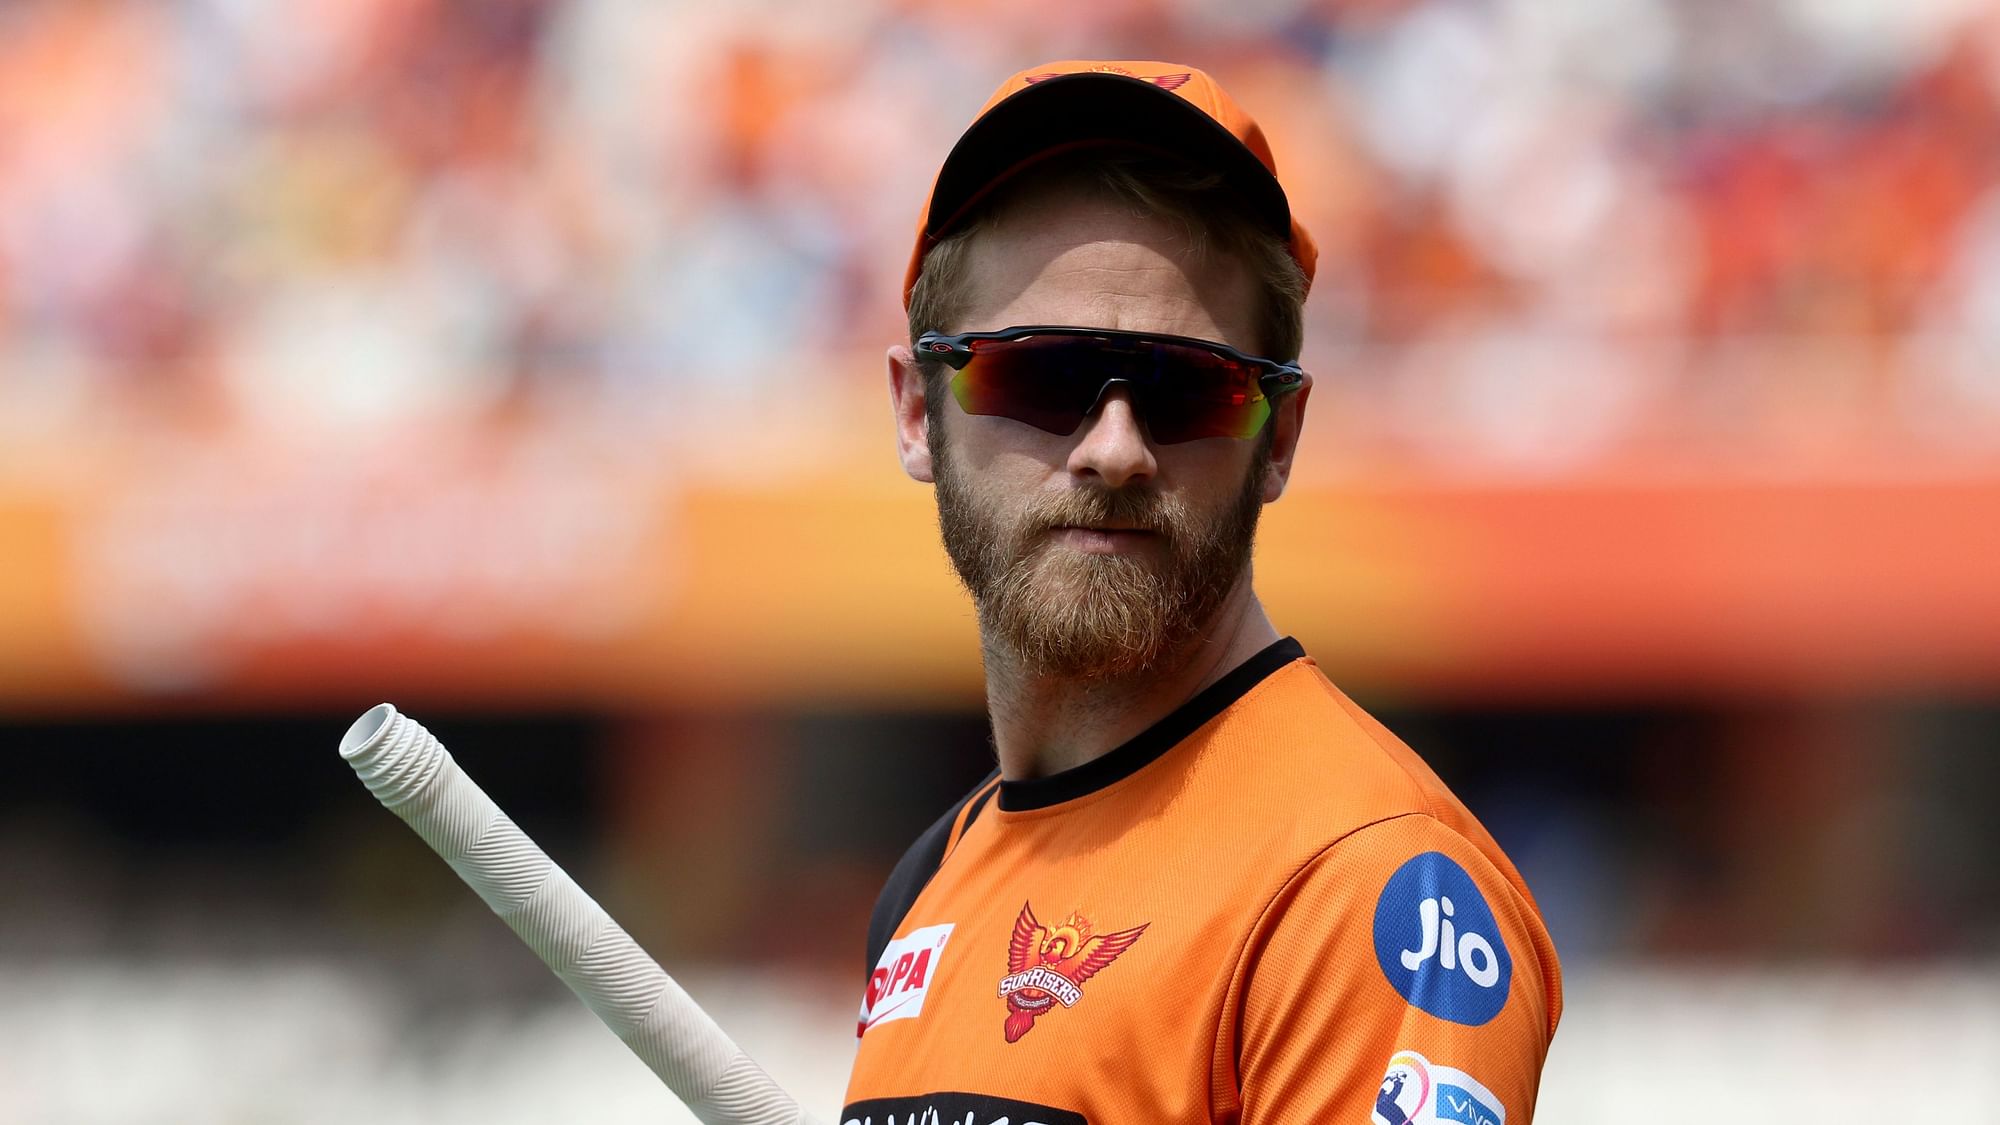 Kane Williamson has been one of the in-form players for SRH in the latter half of IPL 2020.&nbsp;